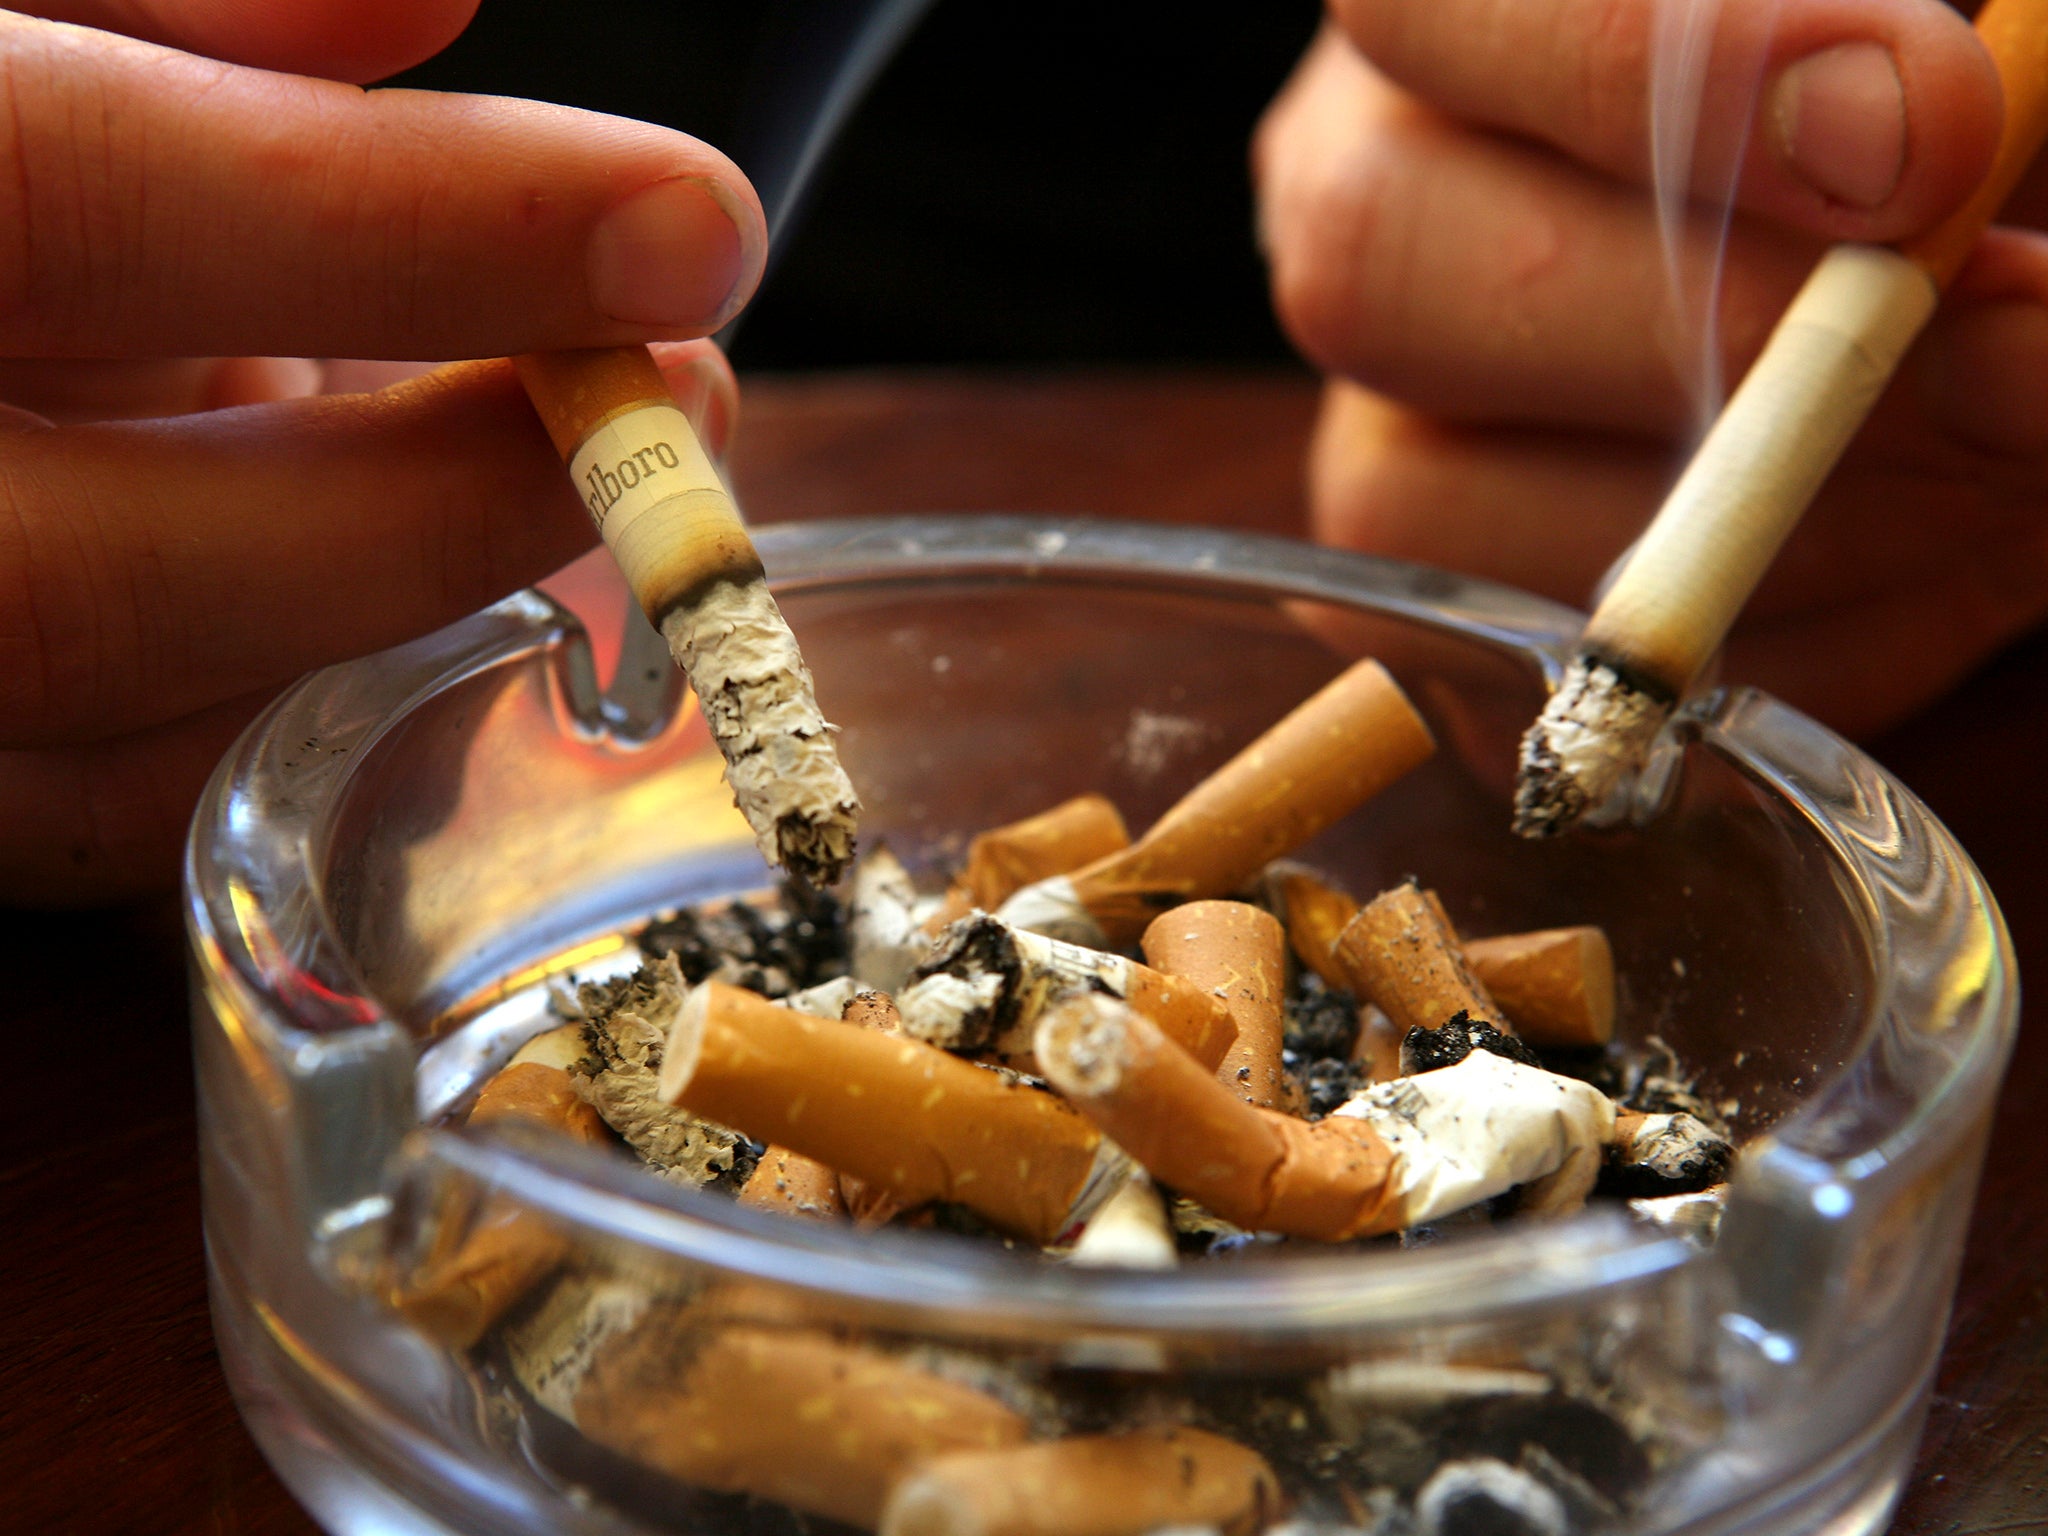 Nearly 6 million people in England are smokers and around one in five people in the UK is affected by lung disease